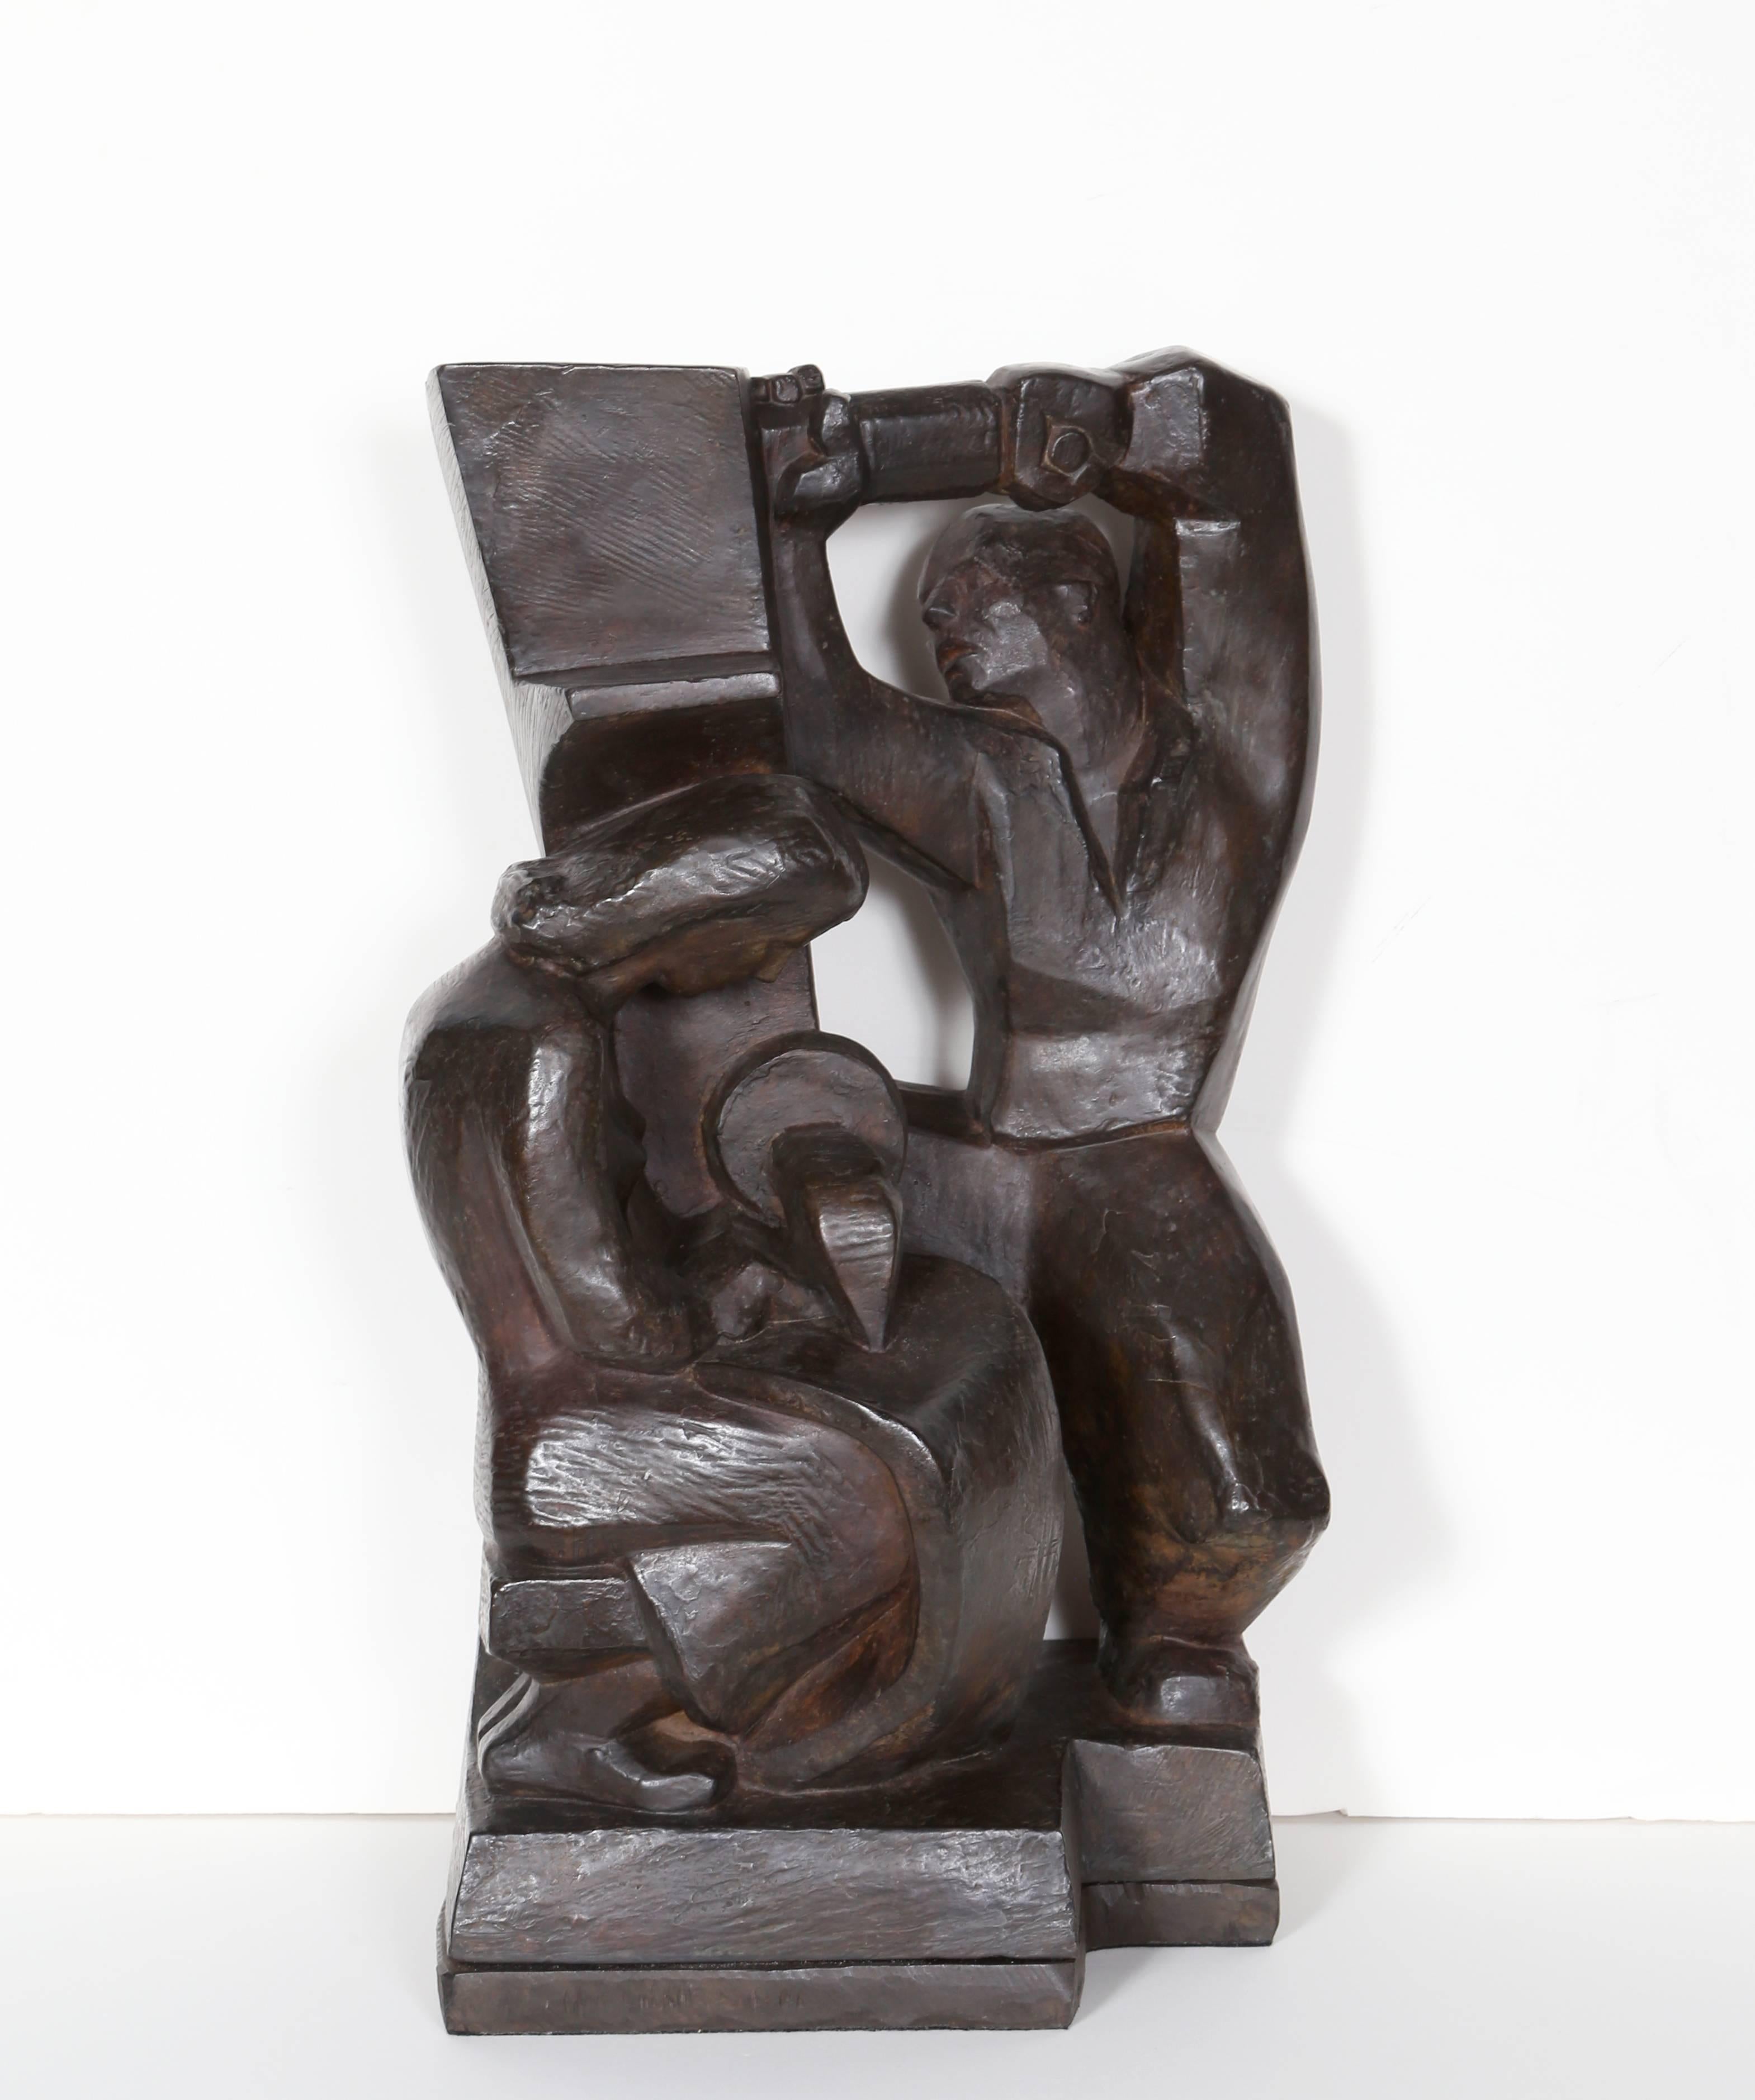 Artist: Robert Cronbach, American (1908 - 2001)
Title: Construction & Garment Worker 
Year: 1938
Medium: Bronze sculpture with Brown Patina, signature and date in the cast
Size: 18  x 11  x 9 in. (45.72  x 27.94  x 22.86 cm)
Overall height on steel